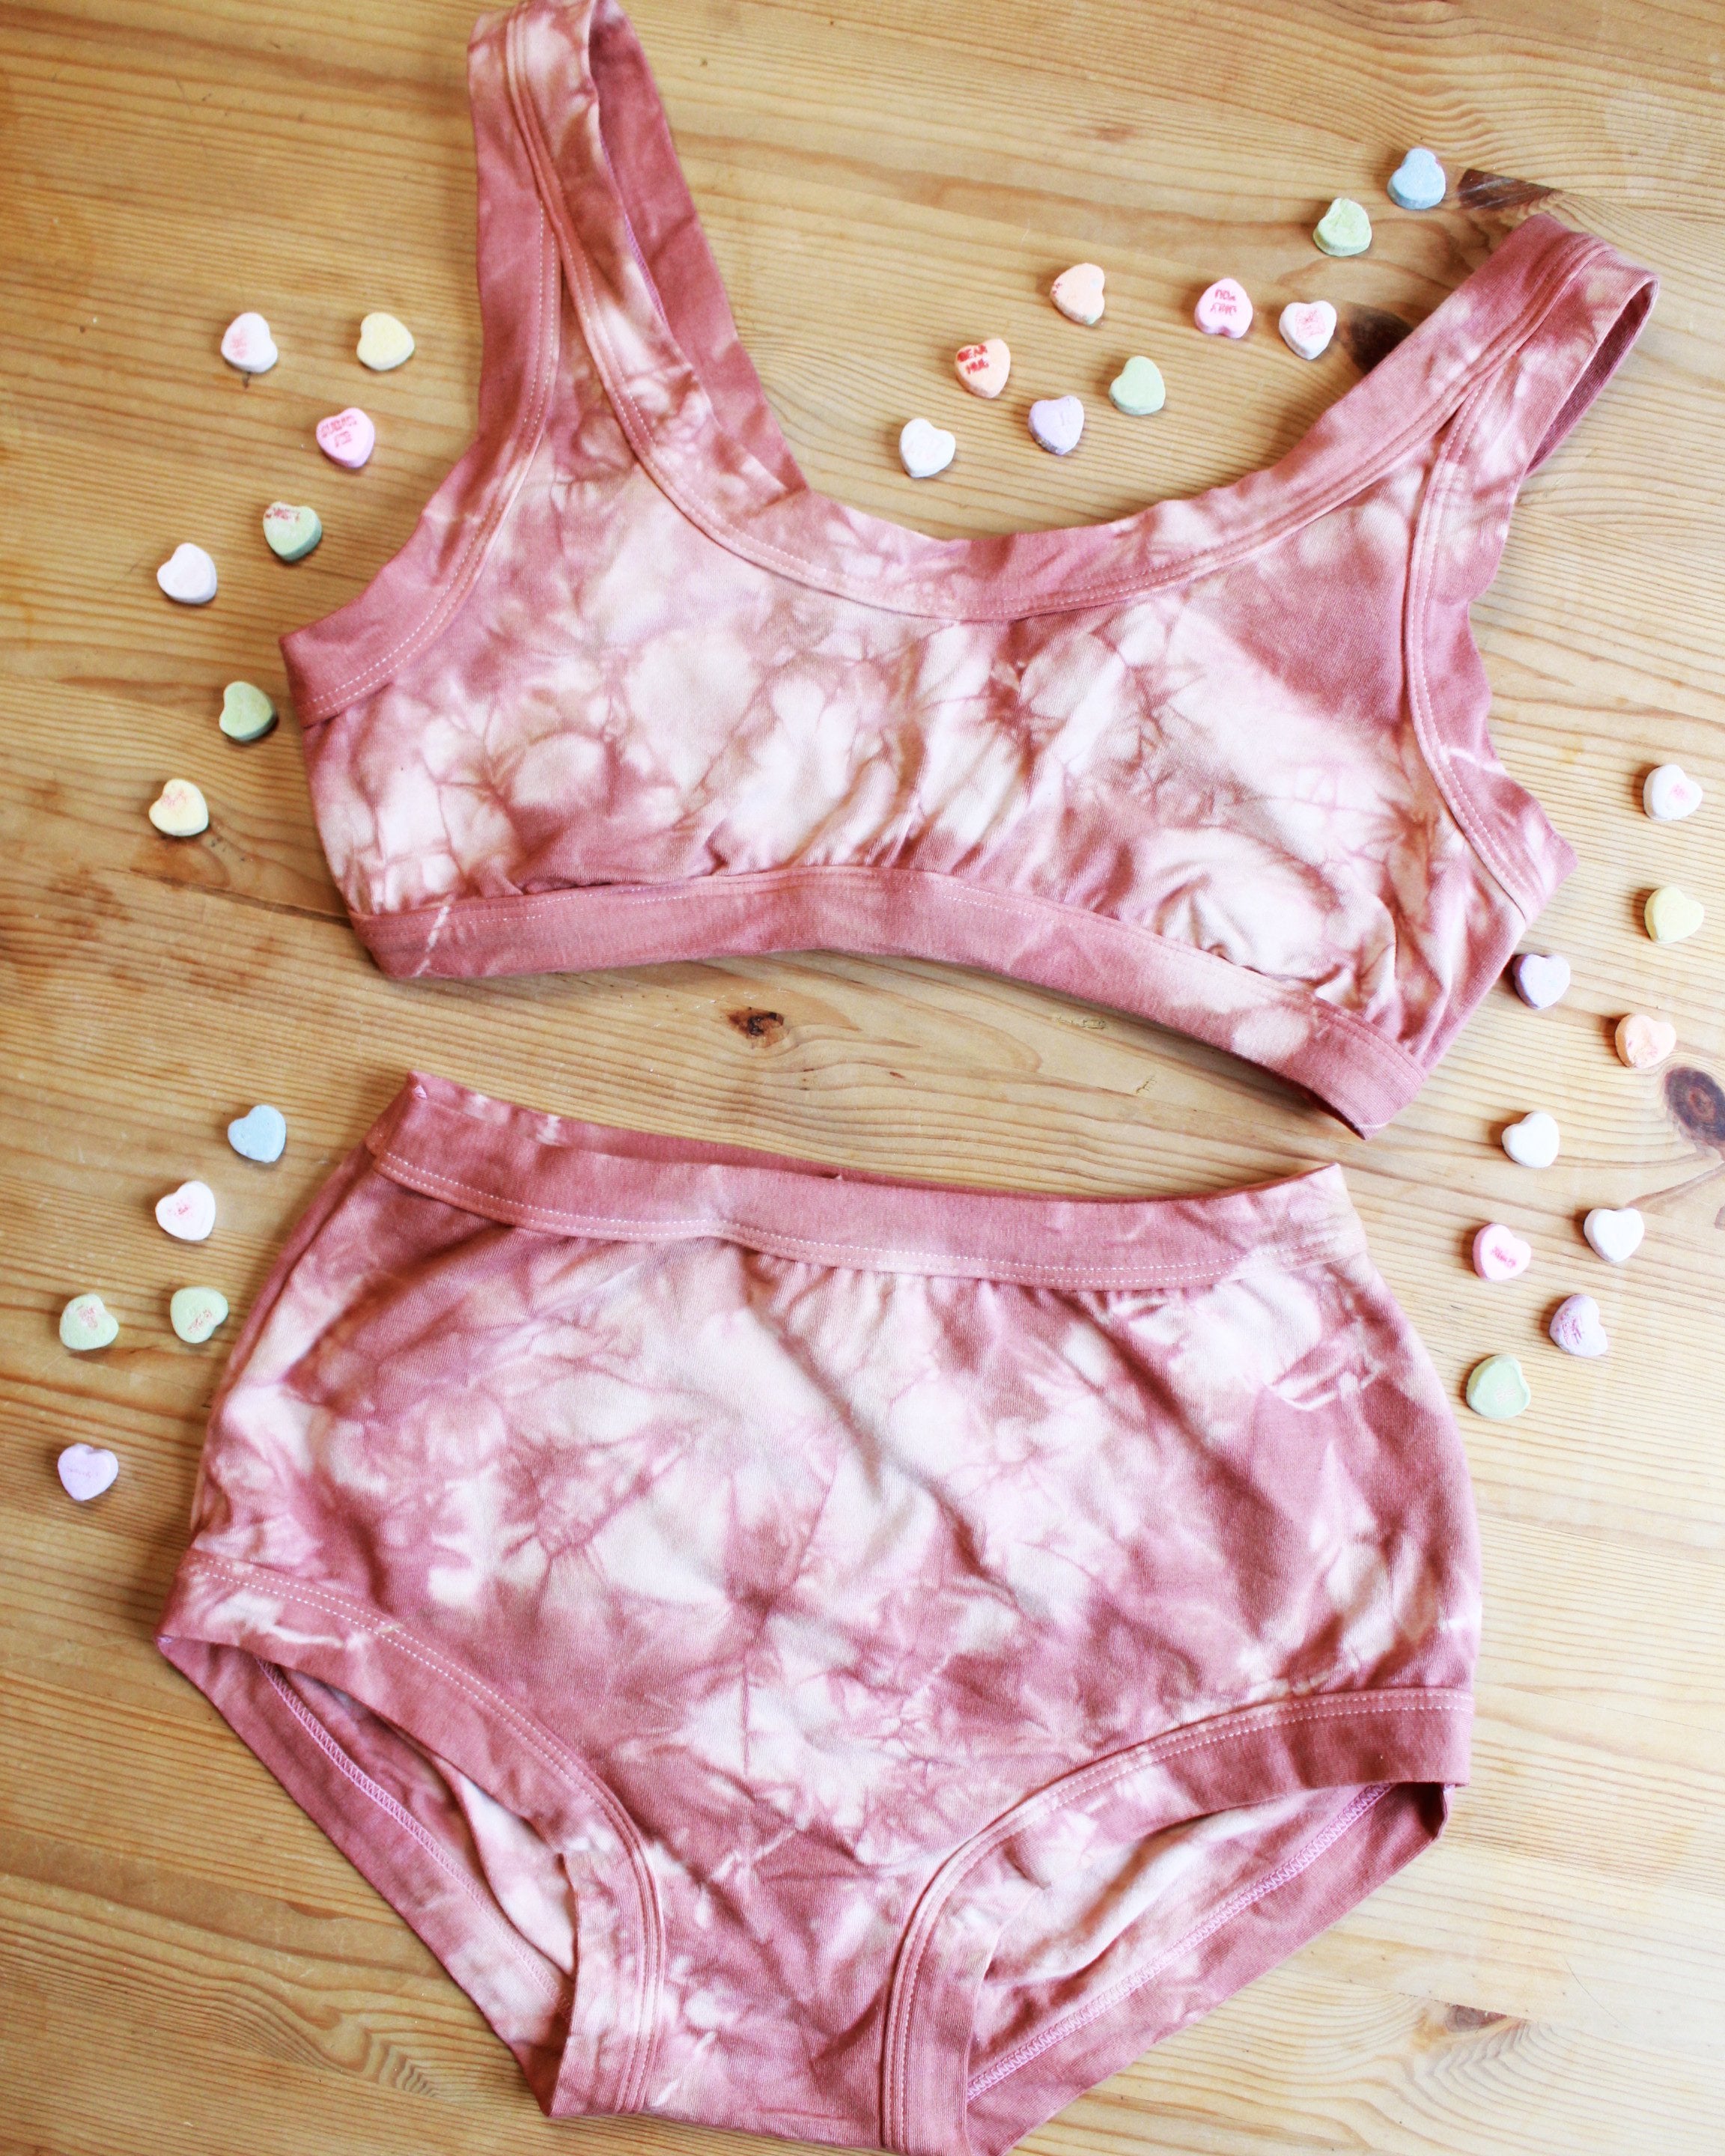 Flat lay of Thunderpants organic cotton Women’s Original style underwear and Bralette in limited edition hand dye pink tie dye.